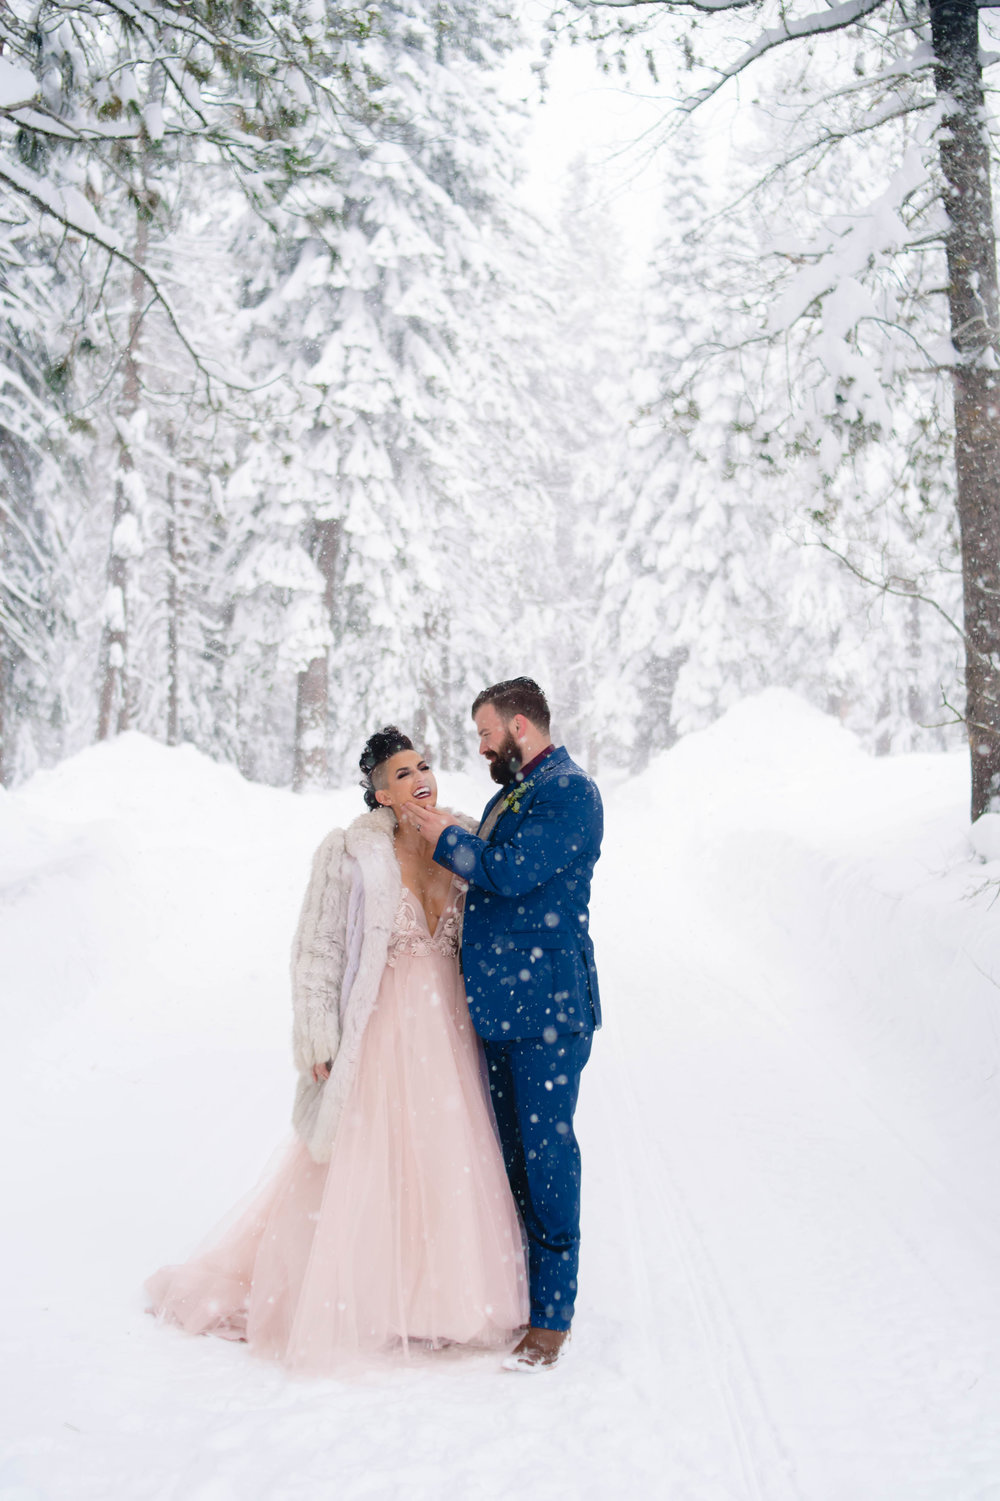 candid portrait of a bride and groom in the snow while the snow falls